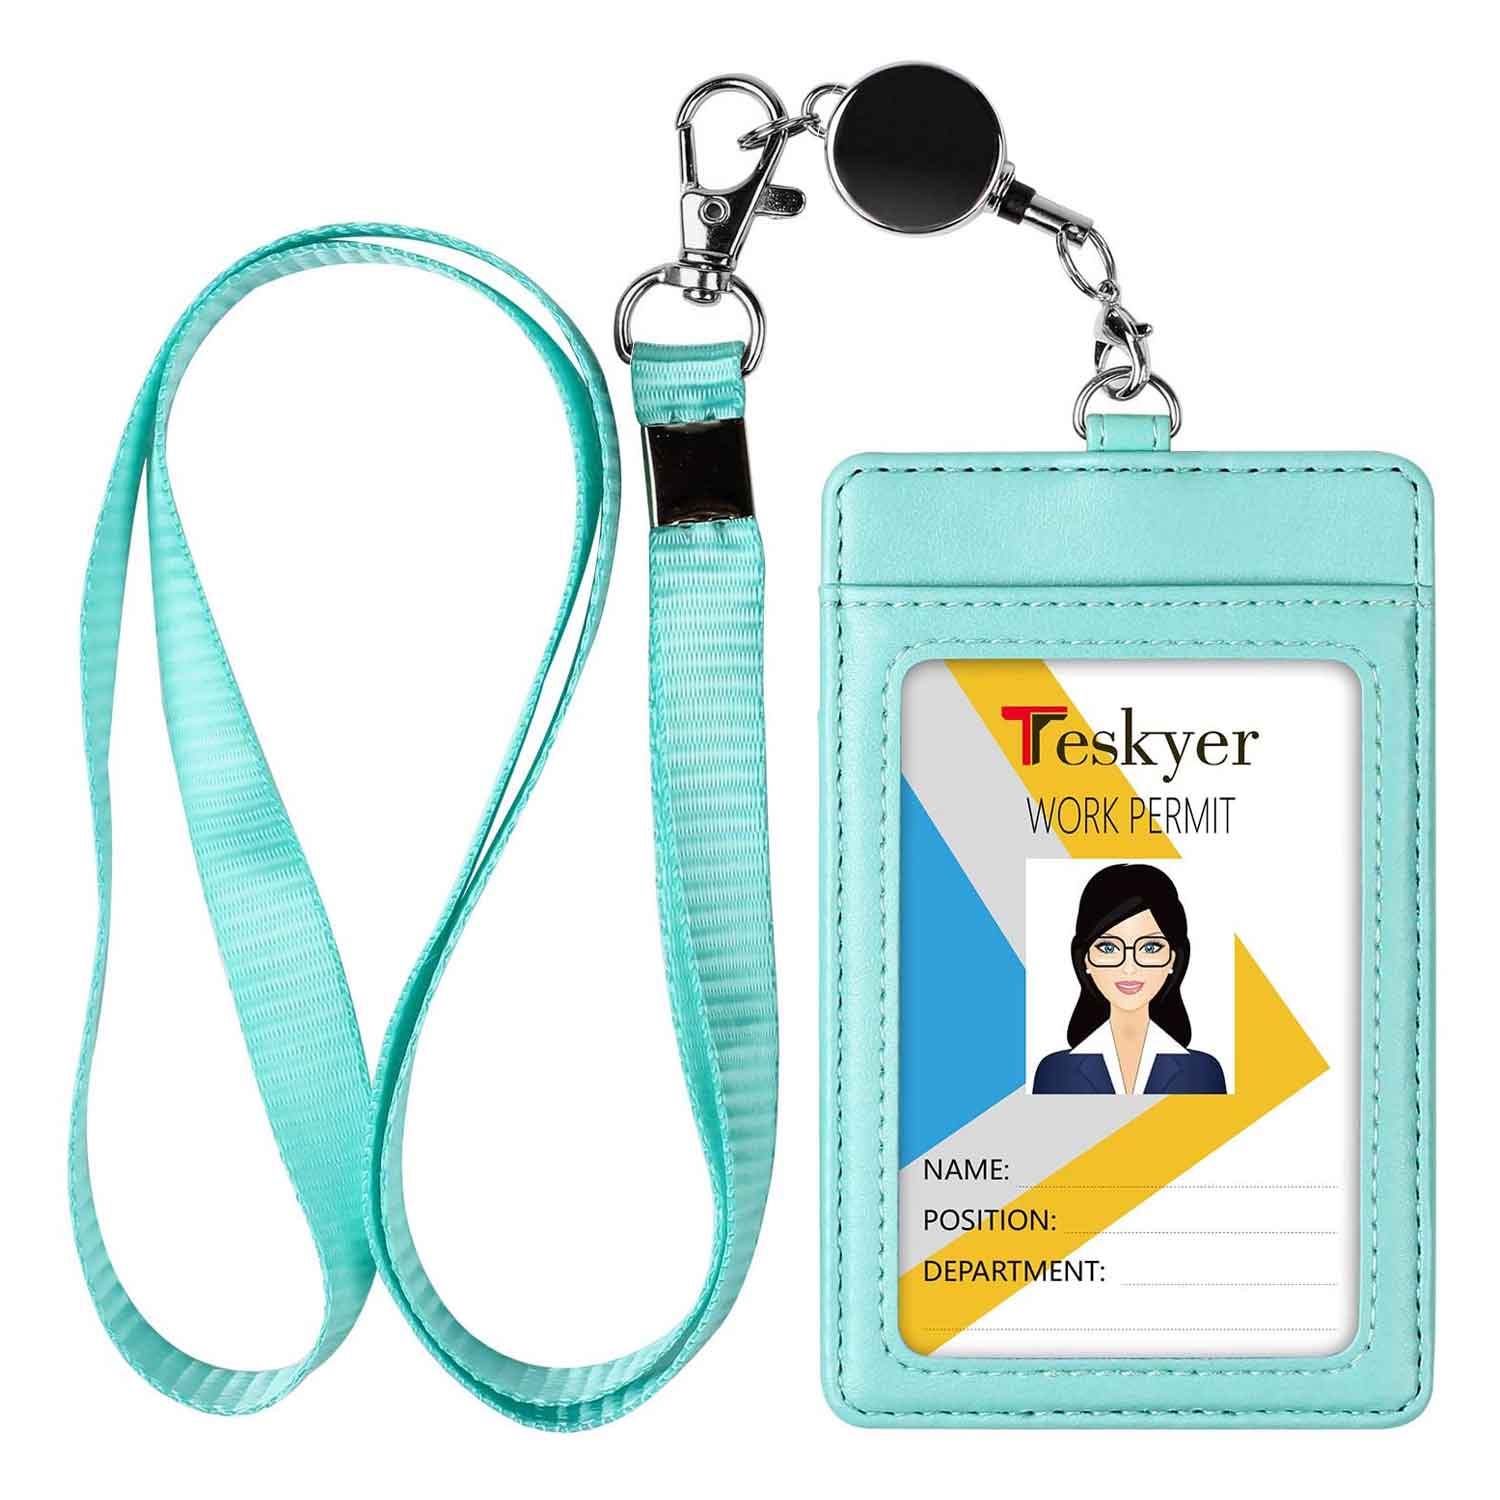 Badge Holder with Zipper, ELV PU Leather ID Badge Card Holder Wallet with 5  Card Slots, 1 Side RFID Blocking Pocket and 20 Neck Lanyard/Strap for